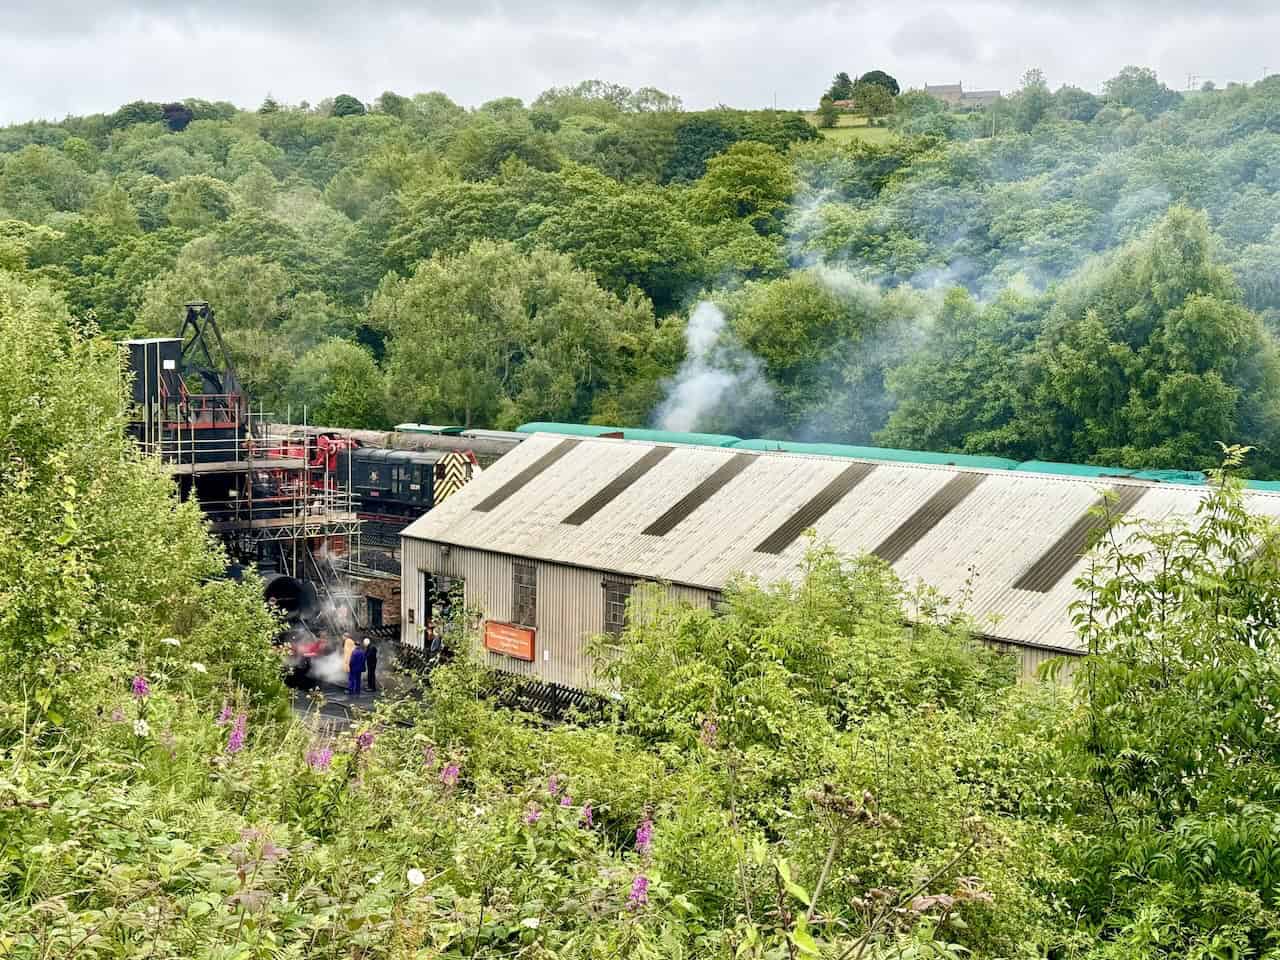 Viewing area with a bench at the top of some steps. Below are the engine sheds and works of the North Yorkshire Moors Railway, set within the lush green landscape.